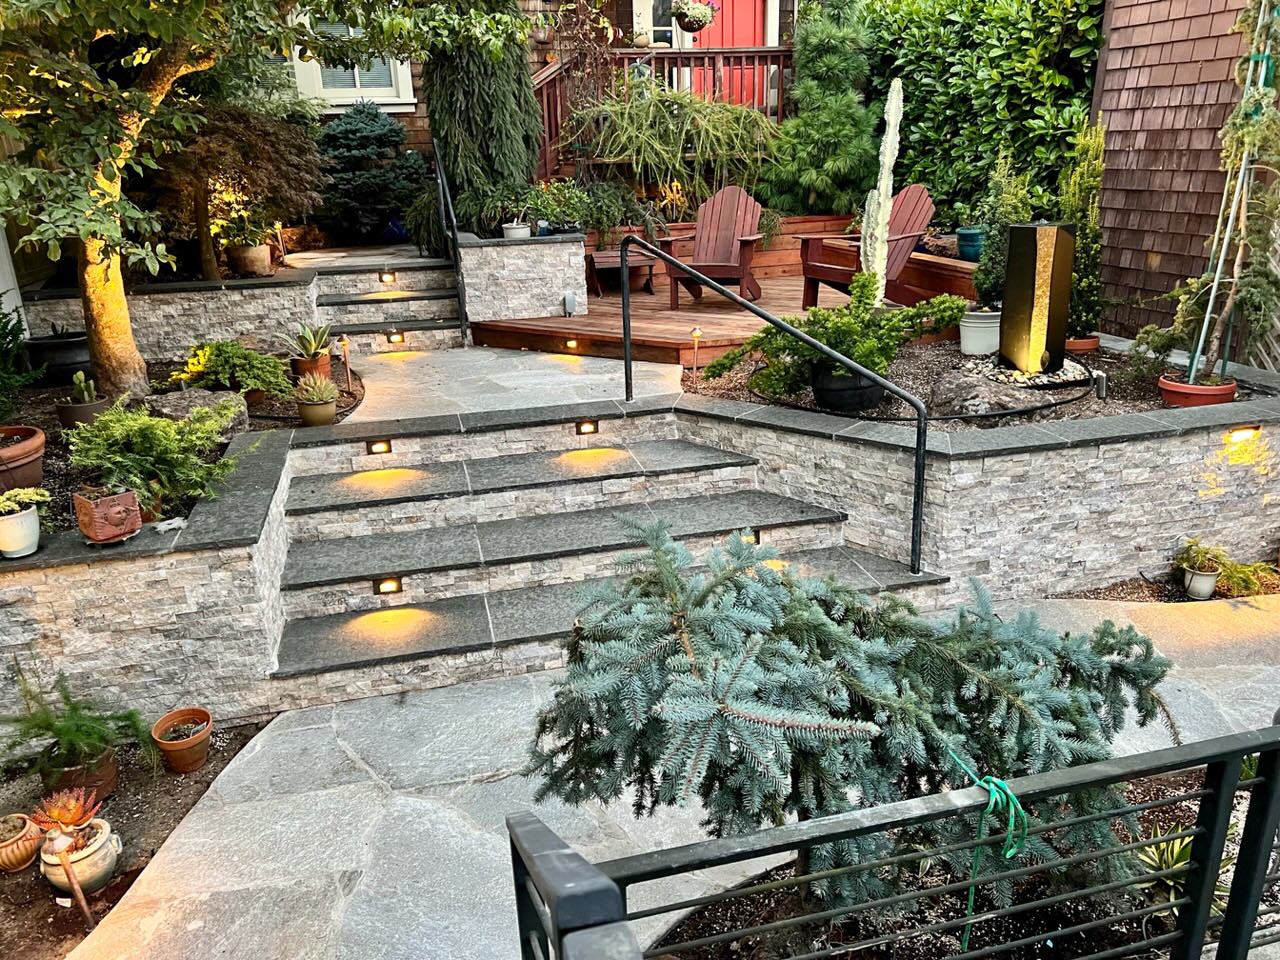 Completed black basalt stairs, quartzite flagstone walkway, retaining walls faced with silver travertine, and redwood deck.